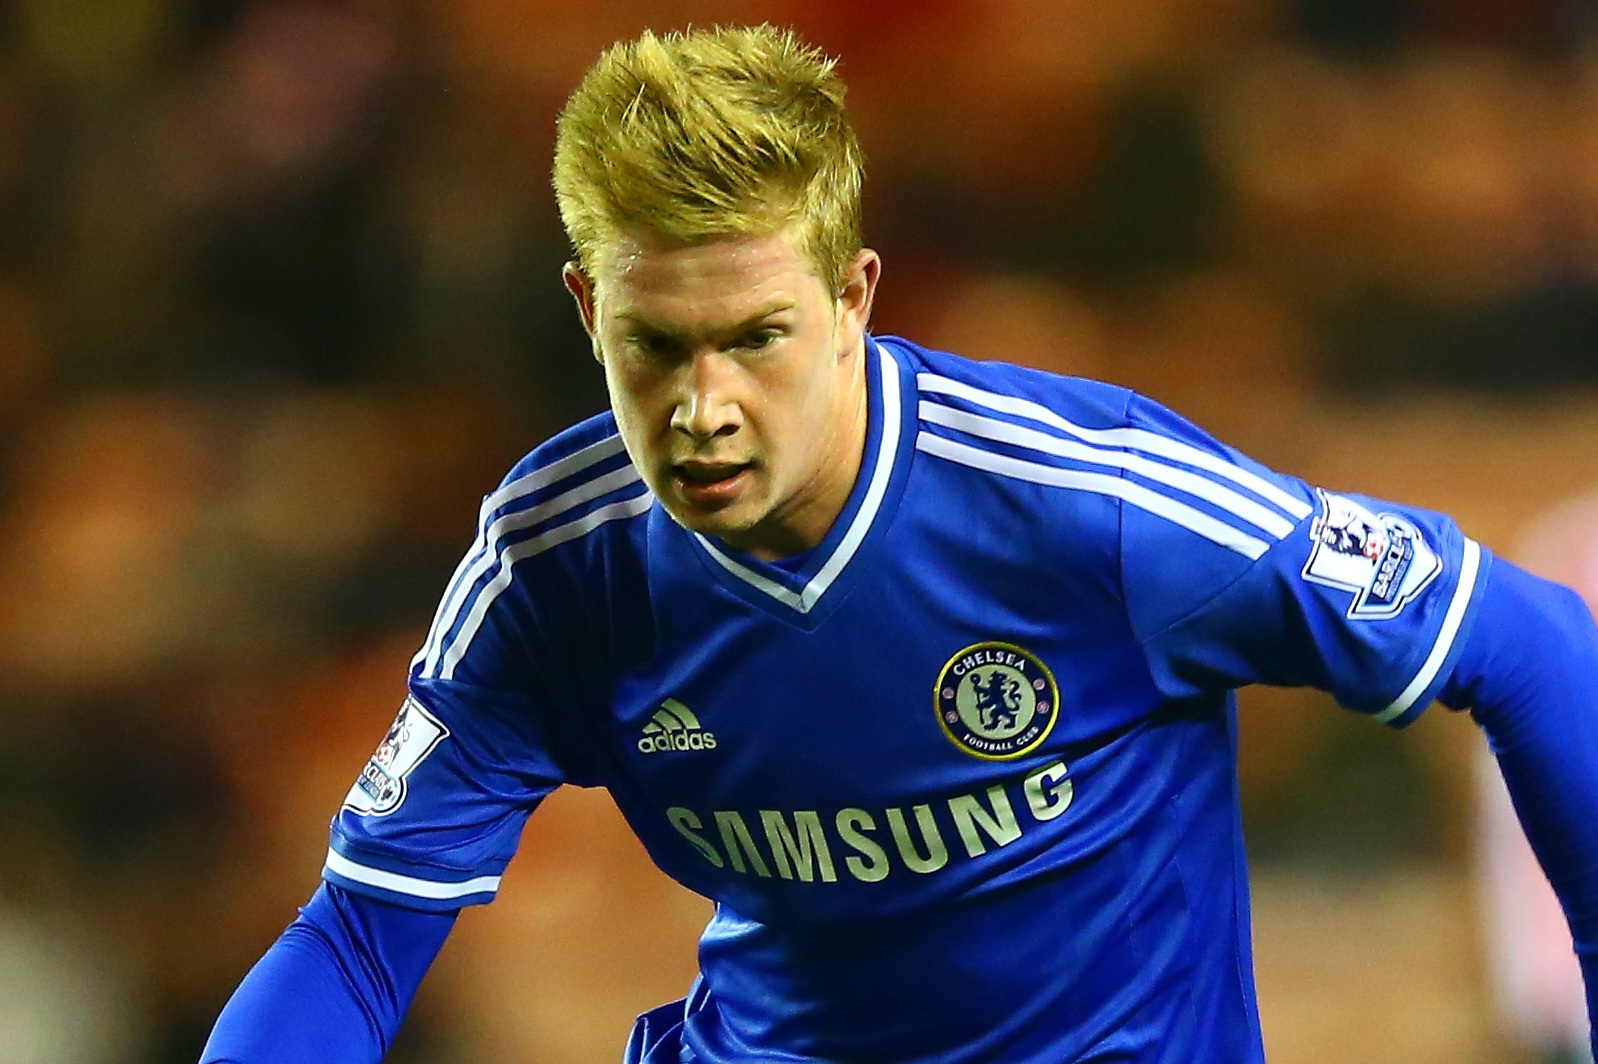 Former Chelsea star Kevin de Bruyne talks about what led to his Stamford Bridge exit .